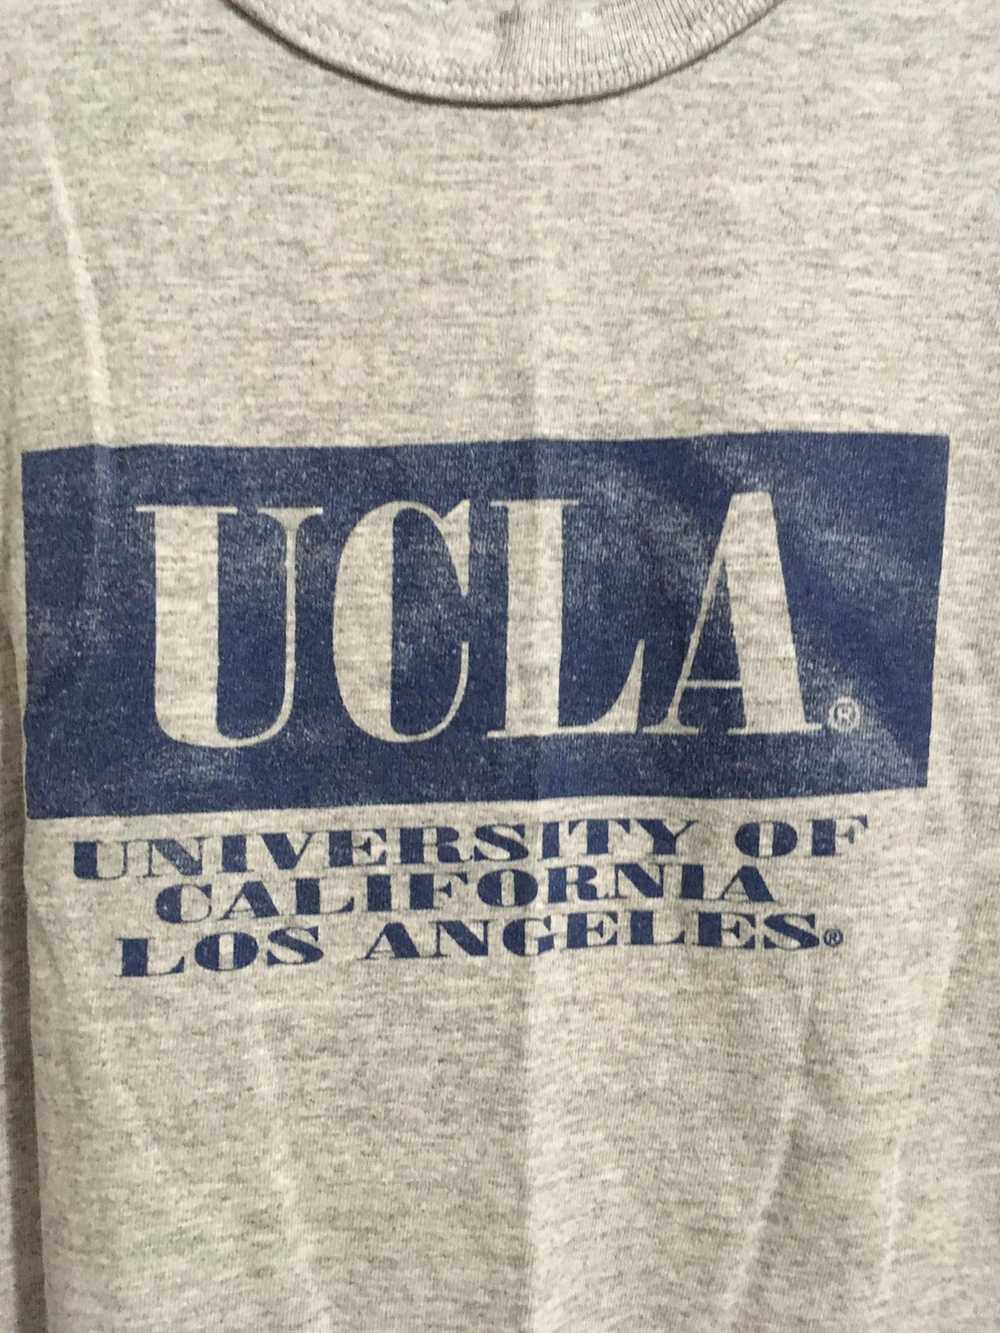 Ncaa × Russell Athletic Vintage 90s UCLA T-shirt - image 2